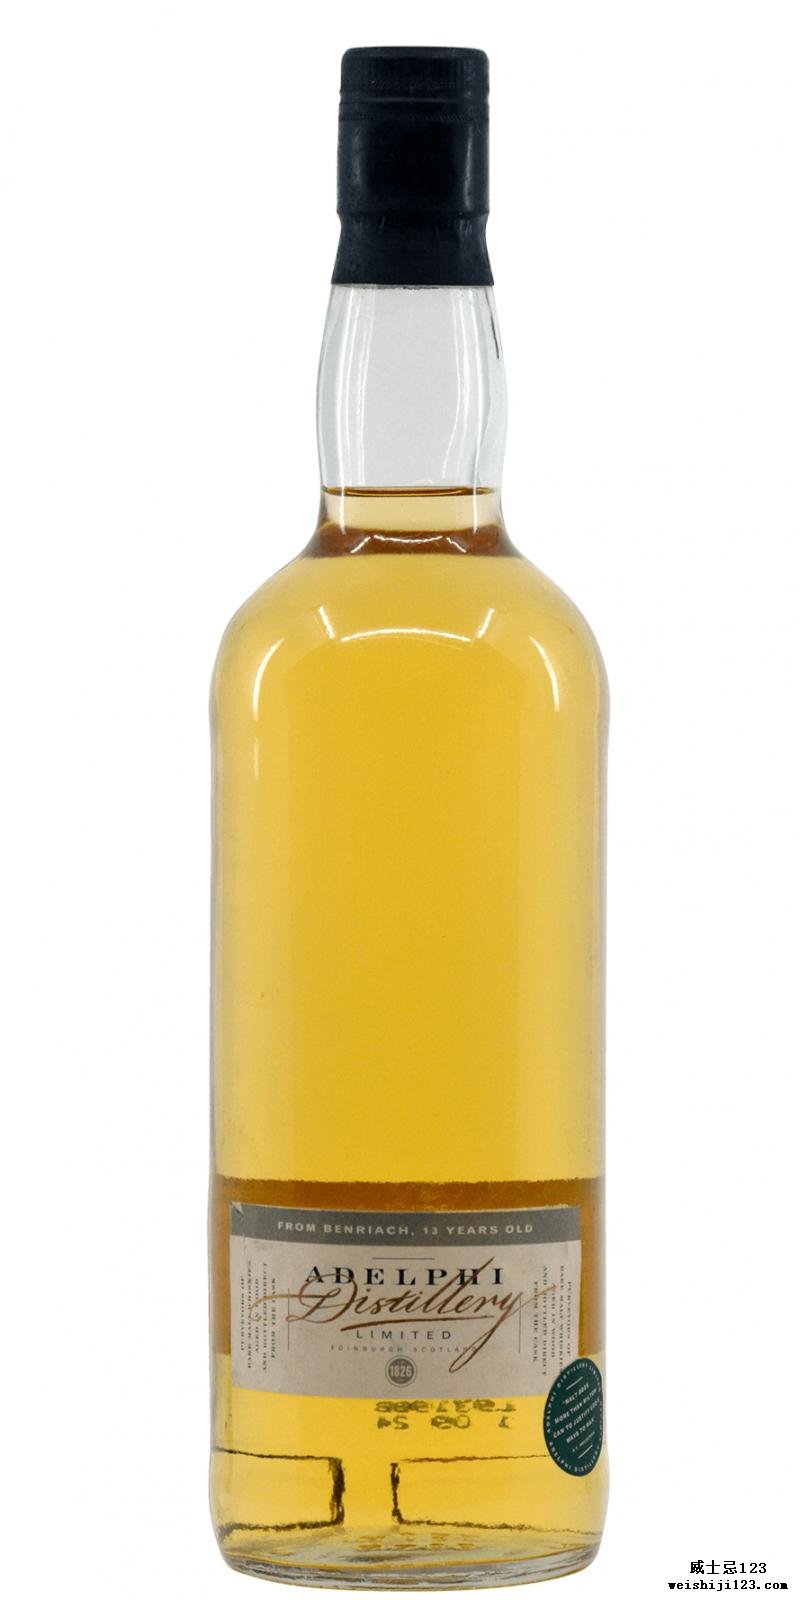 BenRiach 13-year-old